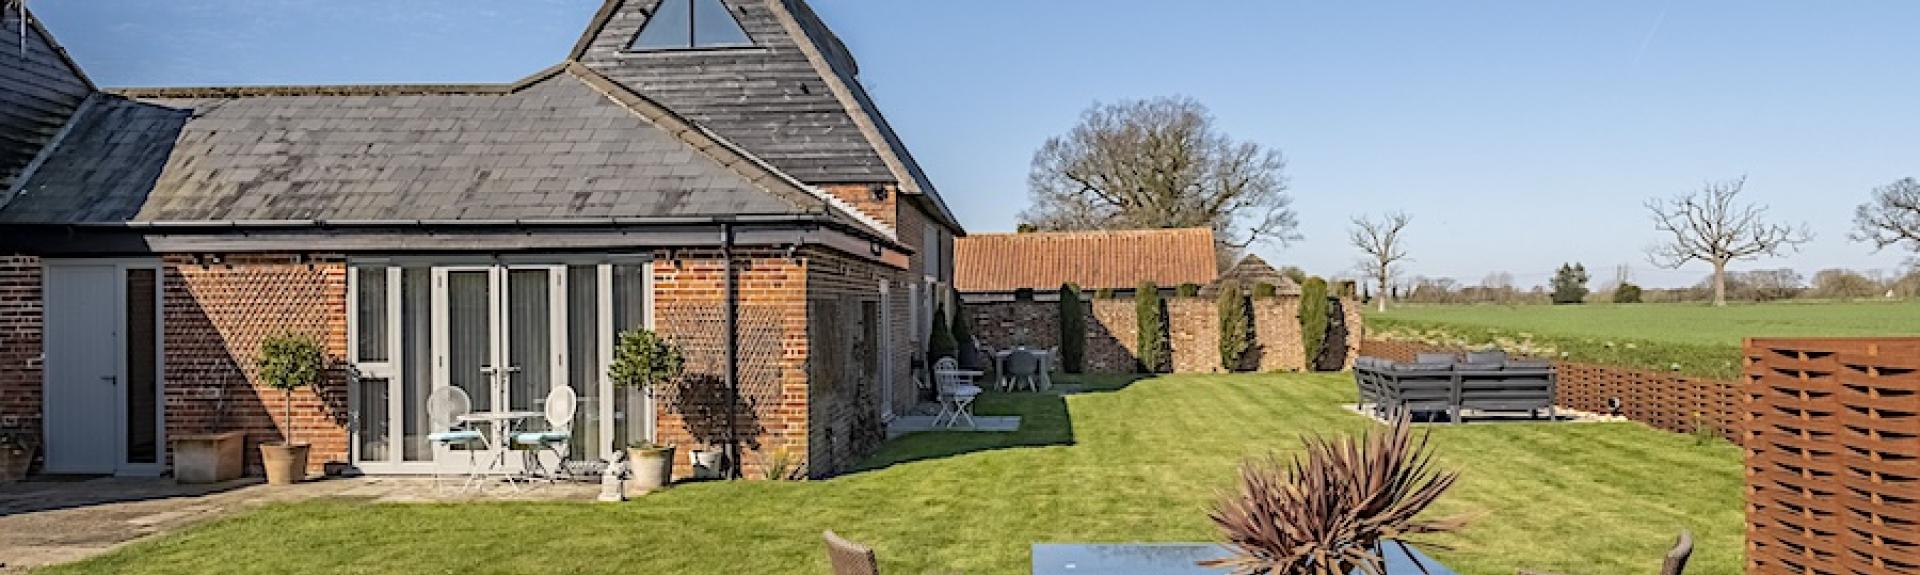 A partially thatched barn conversion overlooks spacious, fenced lawns with an outdoor dining area.